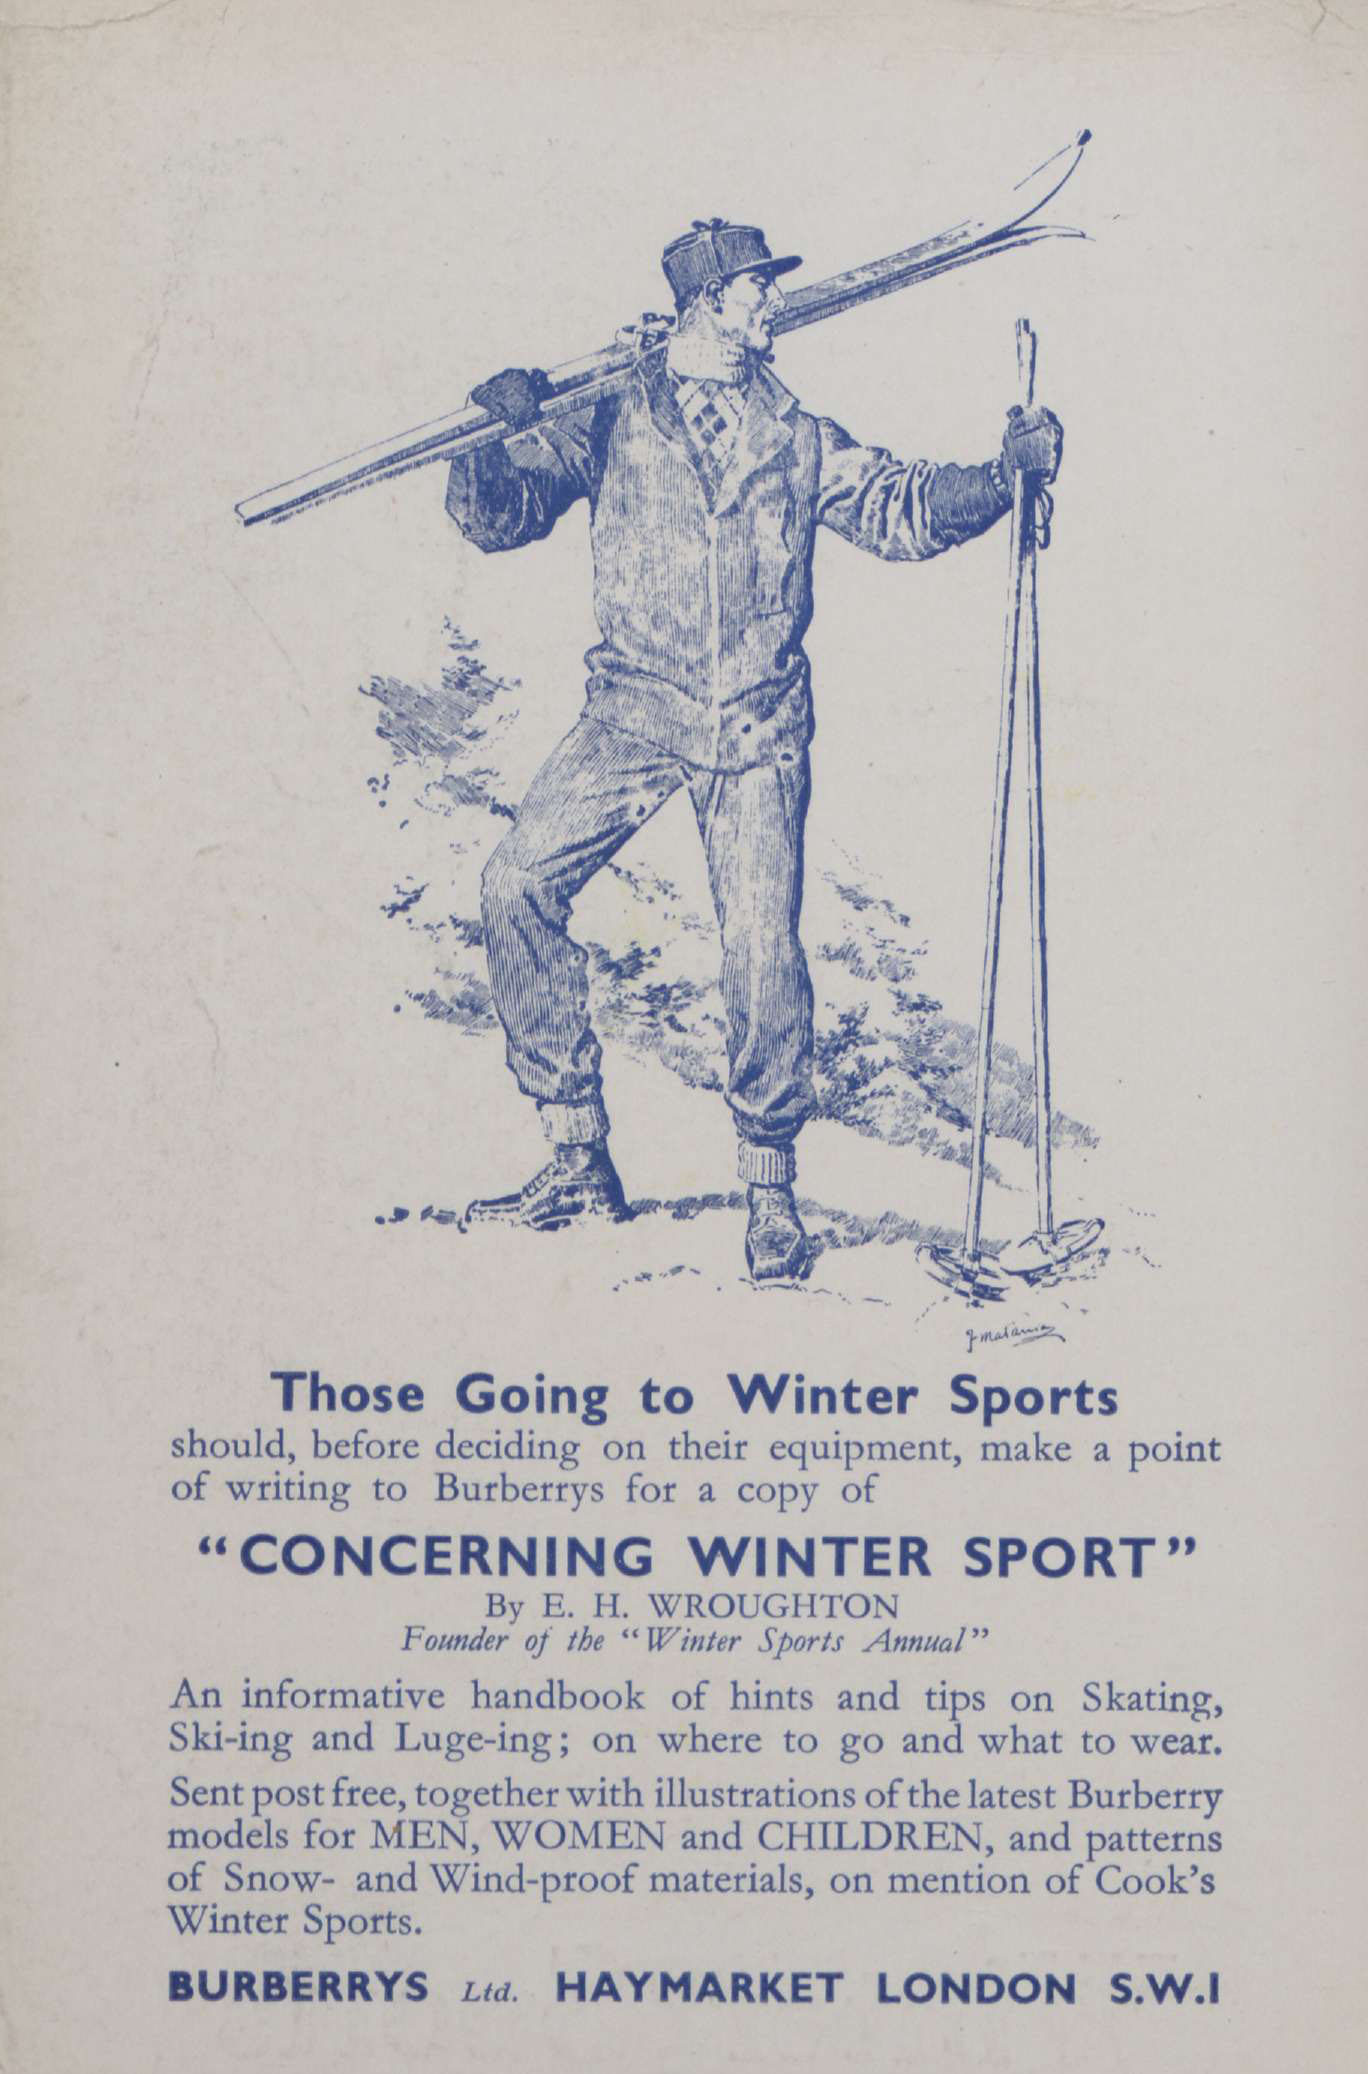 Winter Sports 1931-32. © Permission granted by Thomas Cook Archives